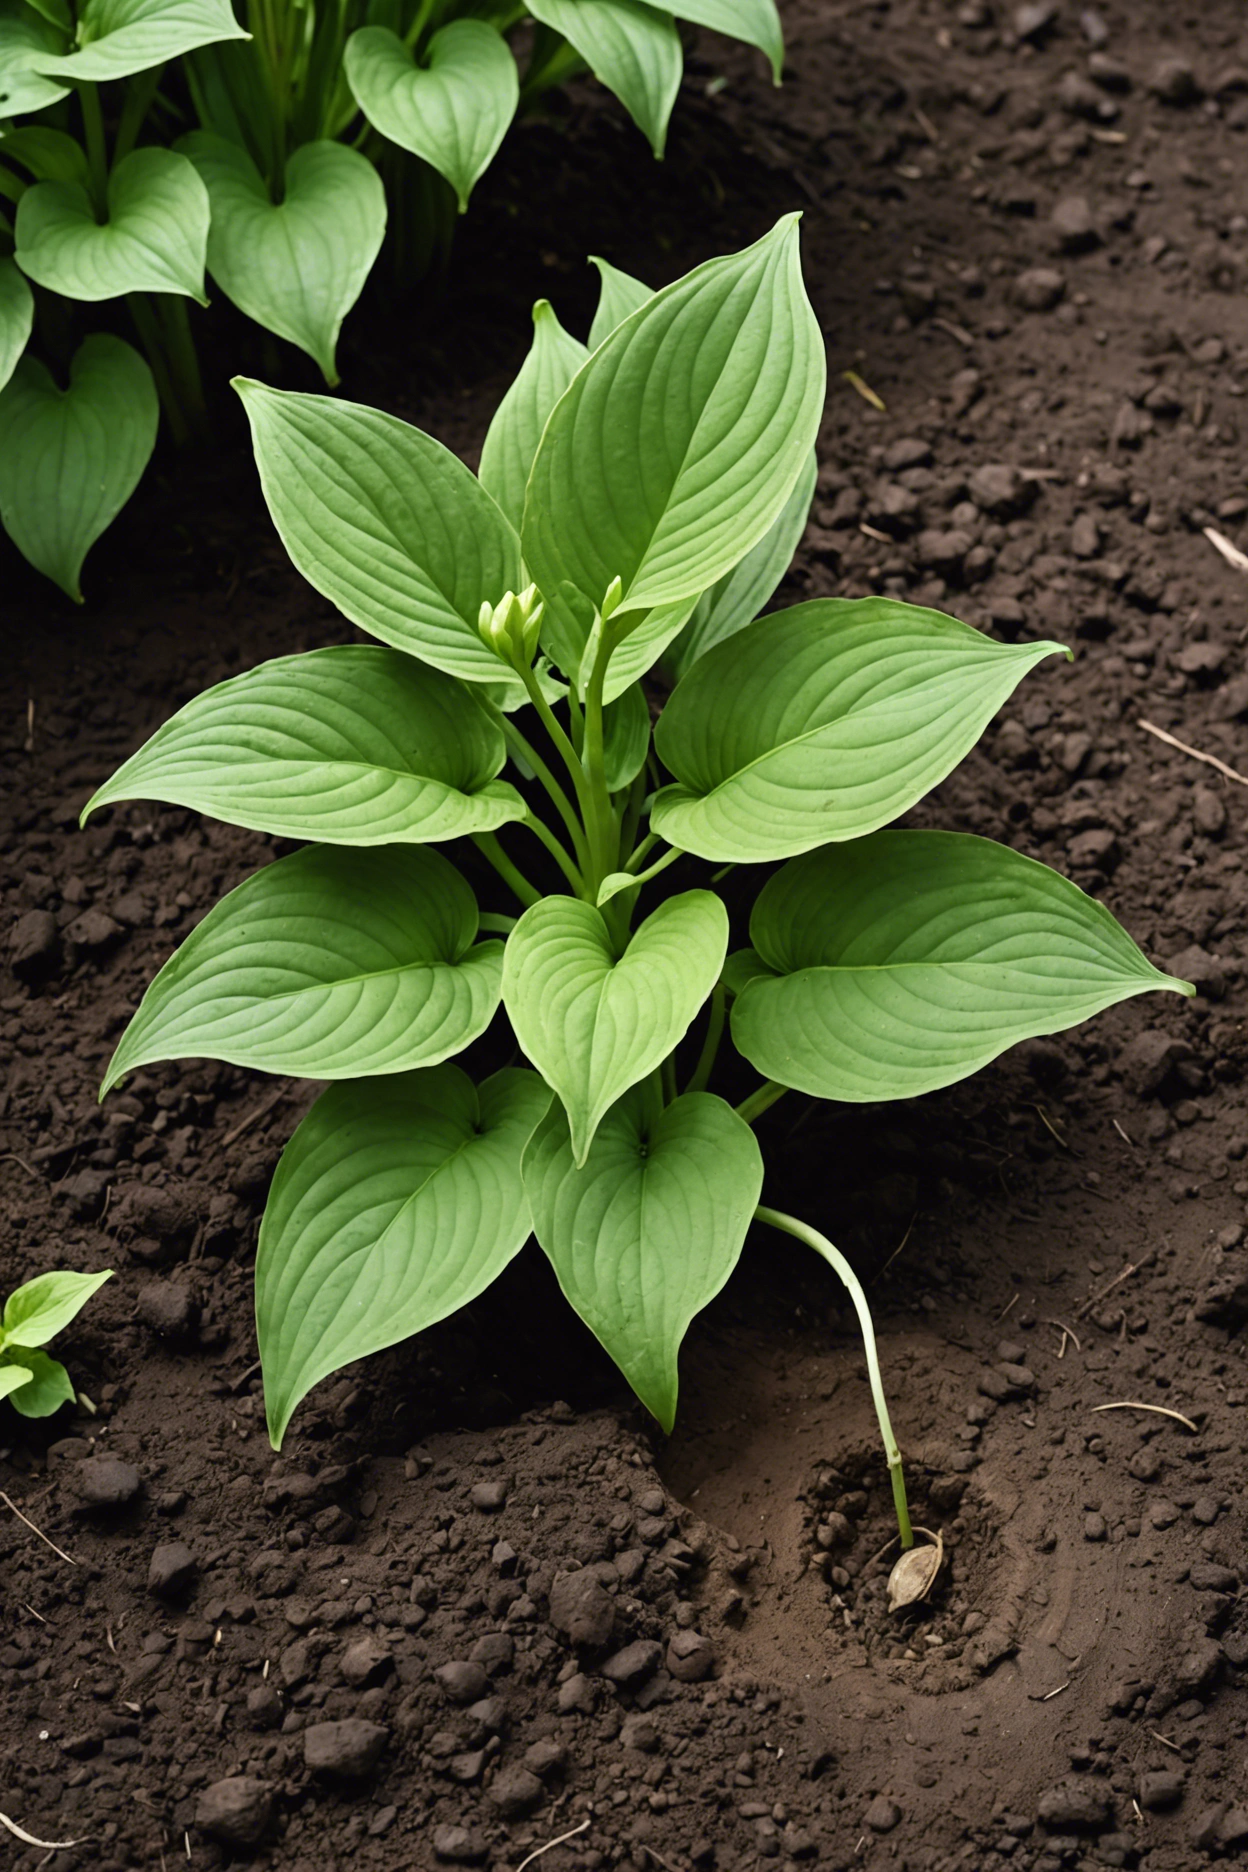 "Hosta plant growing in clay-like soil, showing signs of both health and struggle, with a soil testing kit nearby."